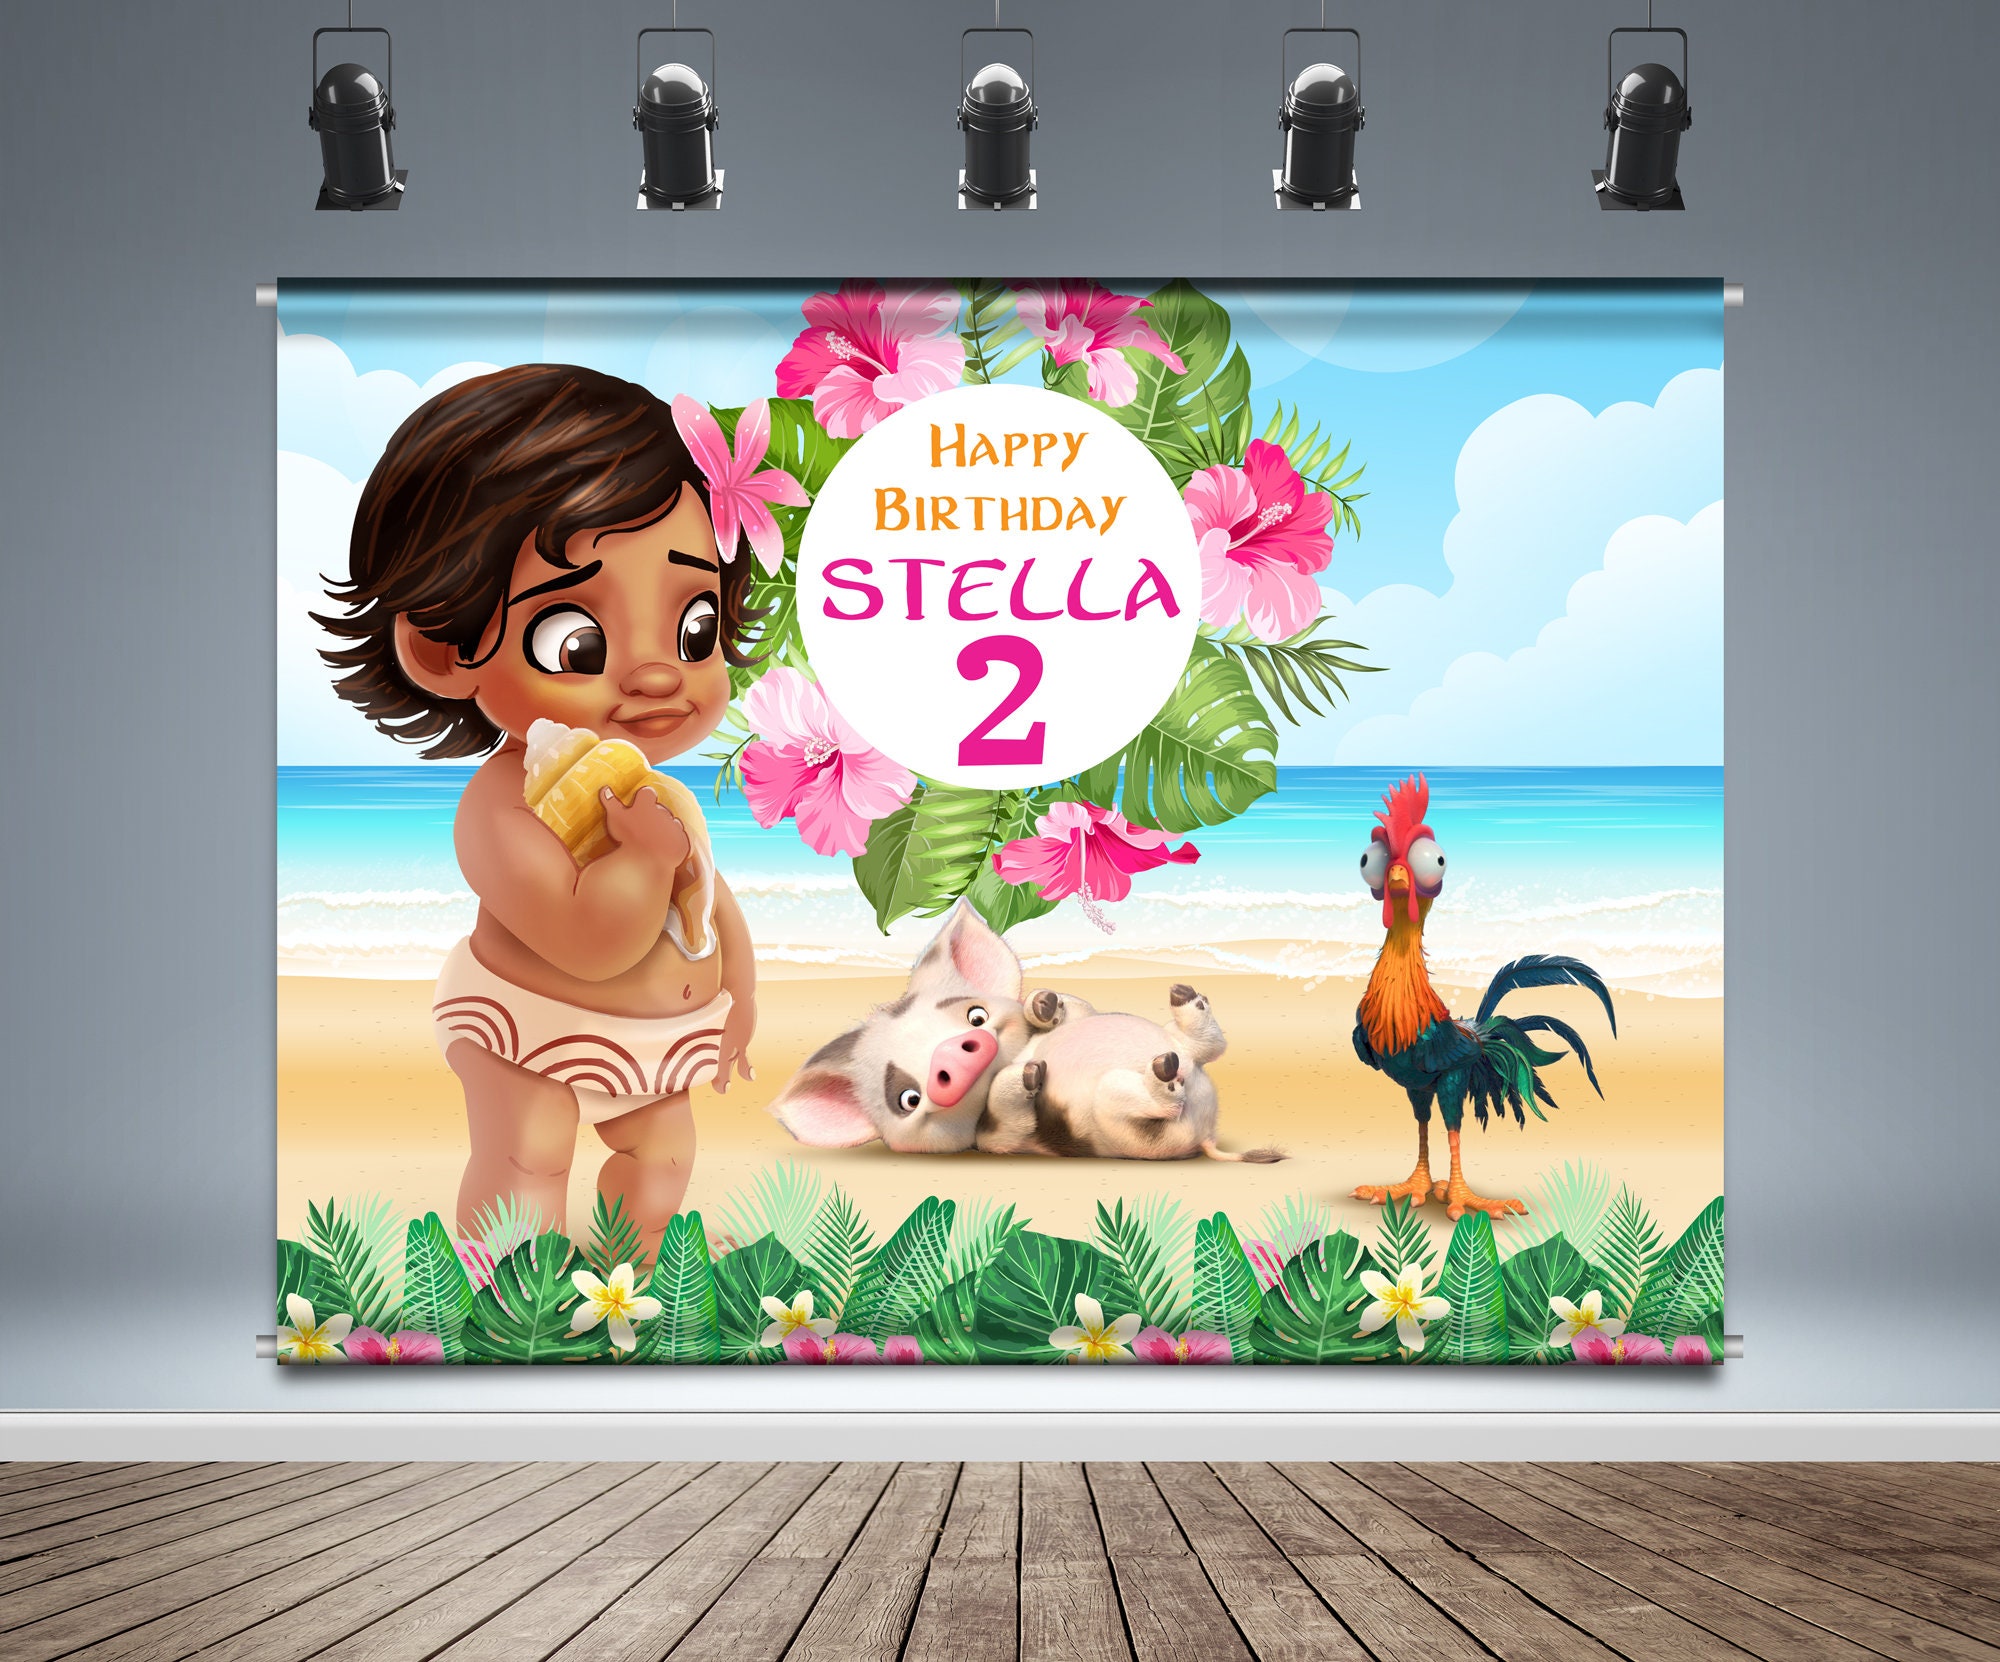 Baby Moana Backdrop Banner Pua Pig Hei Hei Rooster Tropical Etsy